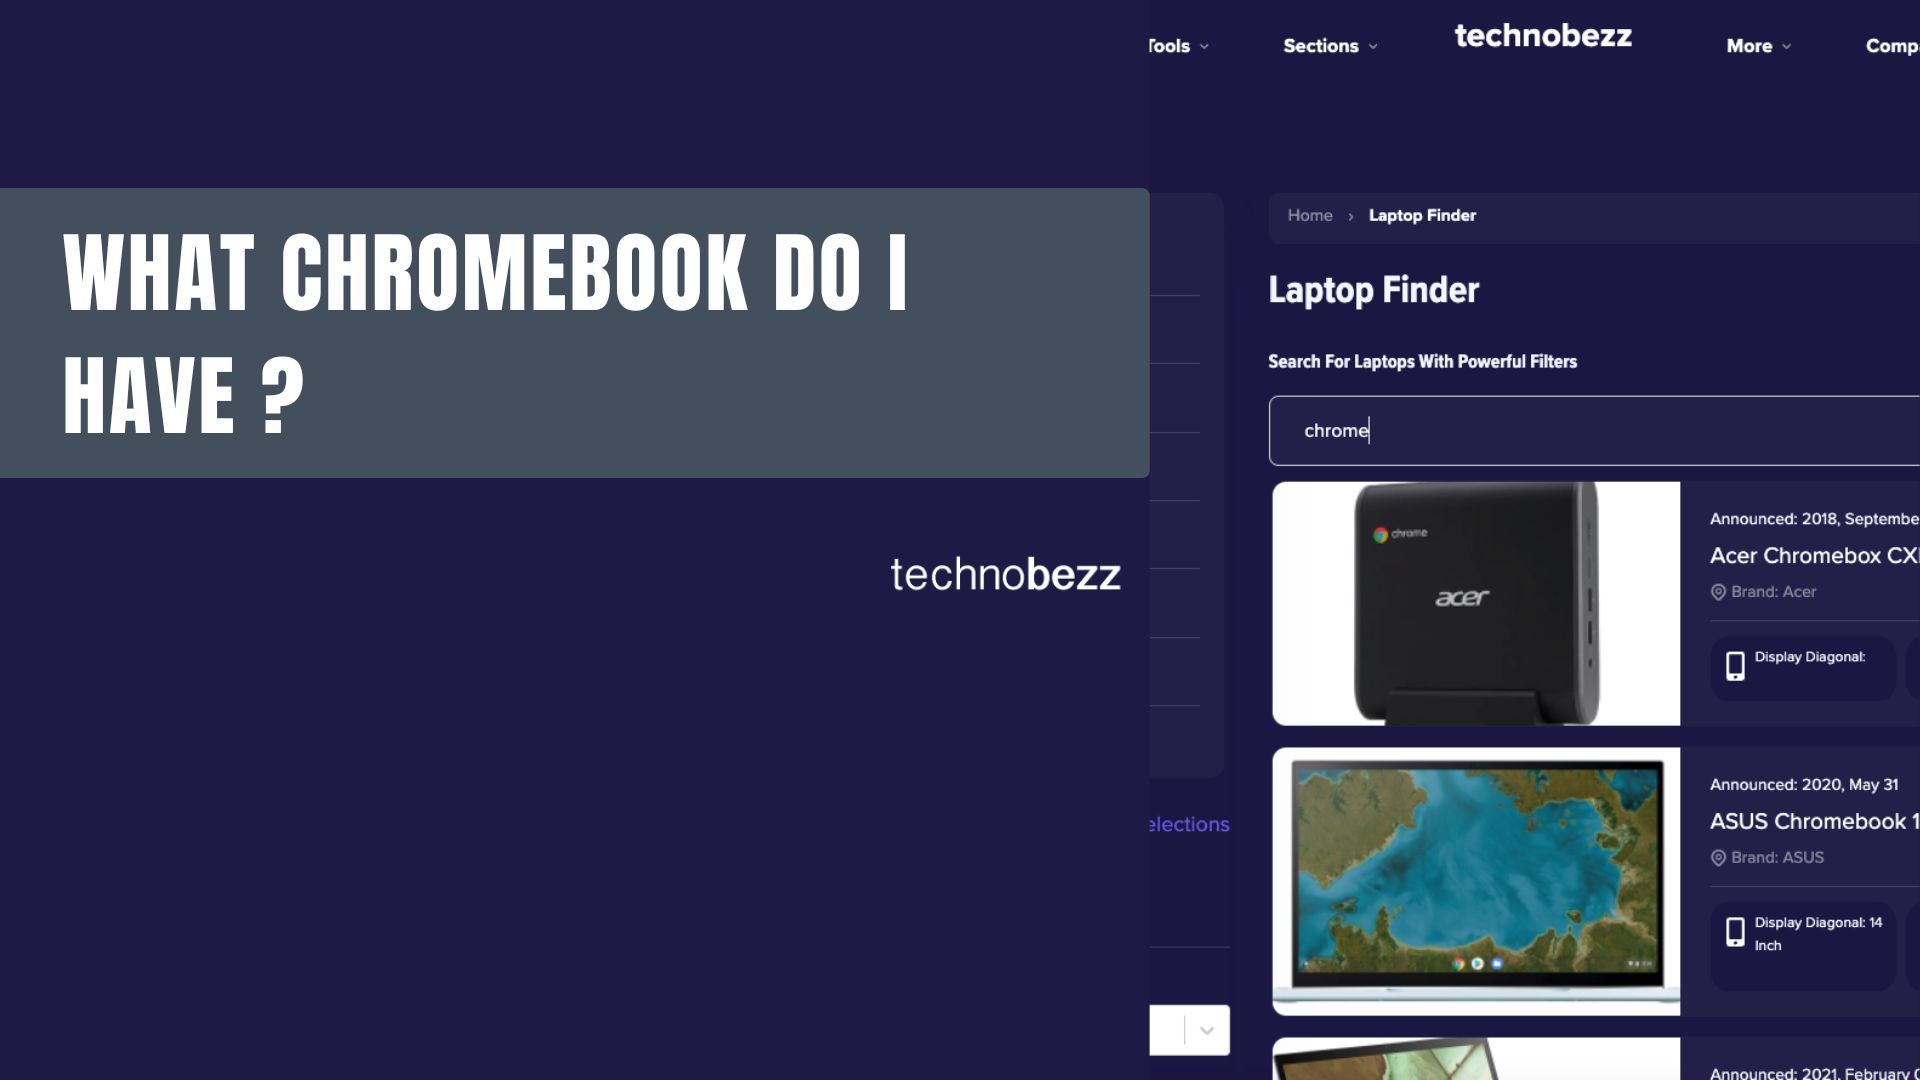 What Model Chromebook Do I Have? 5 How To Check - Technobezz